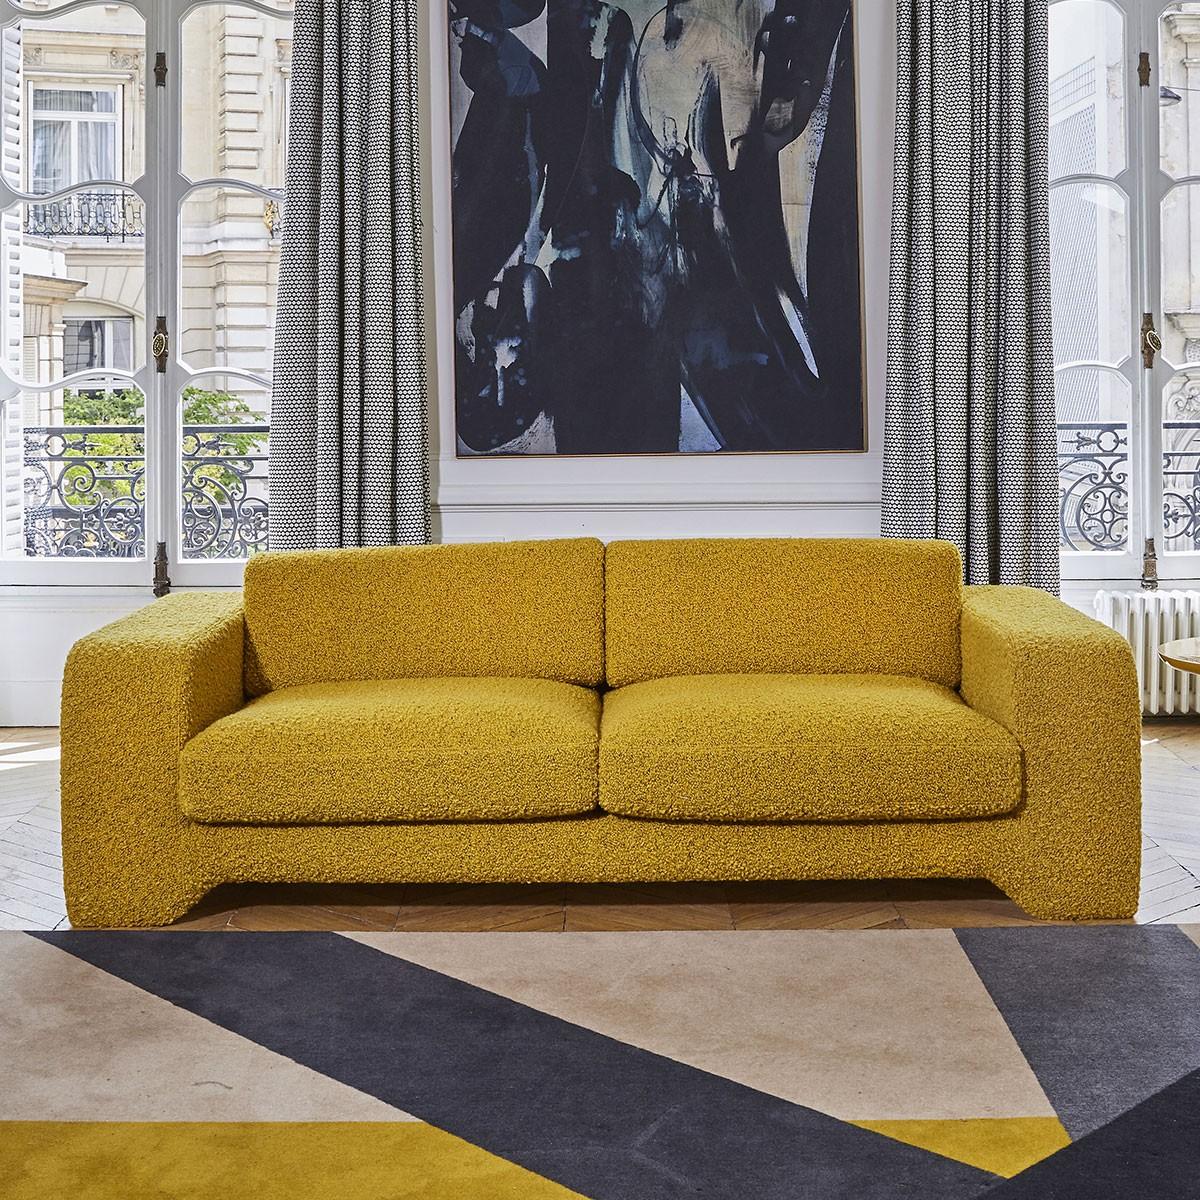 Popus Editions Giovanna 2.5 seater sofa in mole antwerp linen upholstery

Giovanna is a sofa with a strong profile. A sober, plush line, with this famous detail that changes everything, so as not to forget its strength of character and this